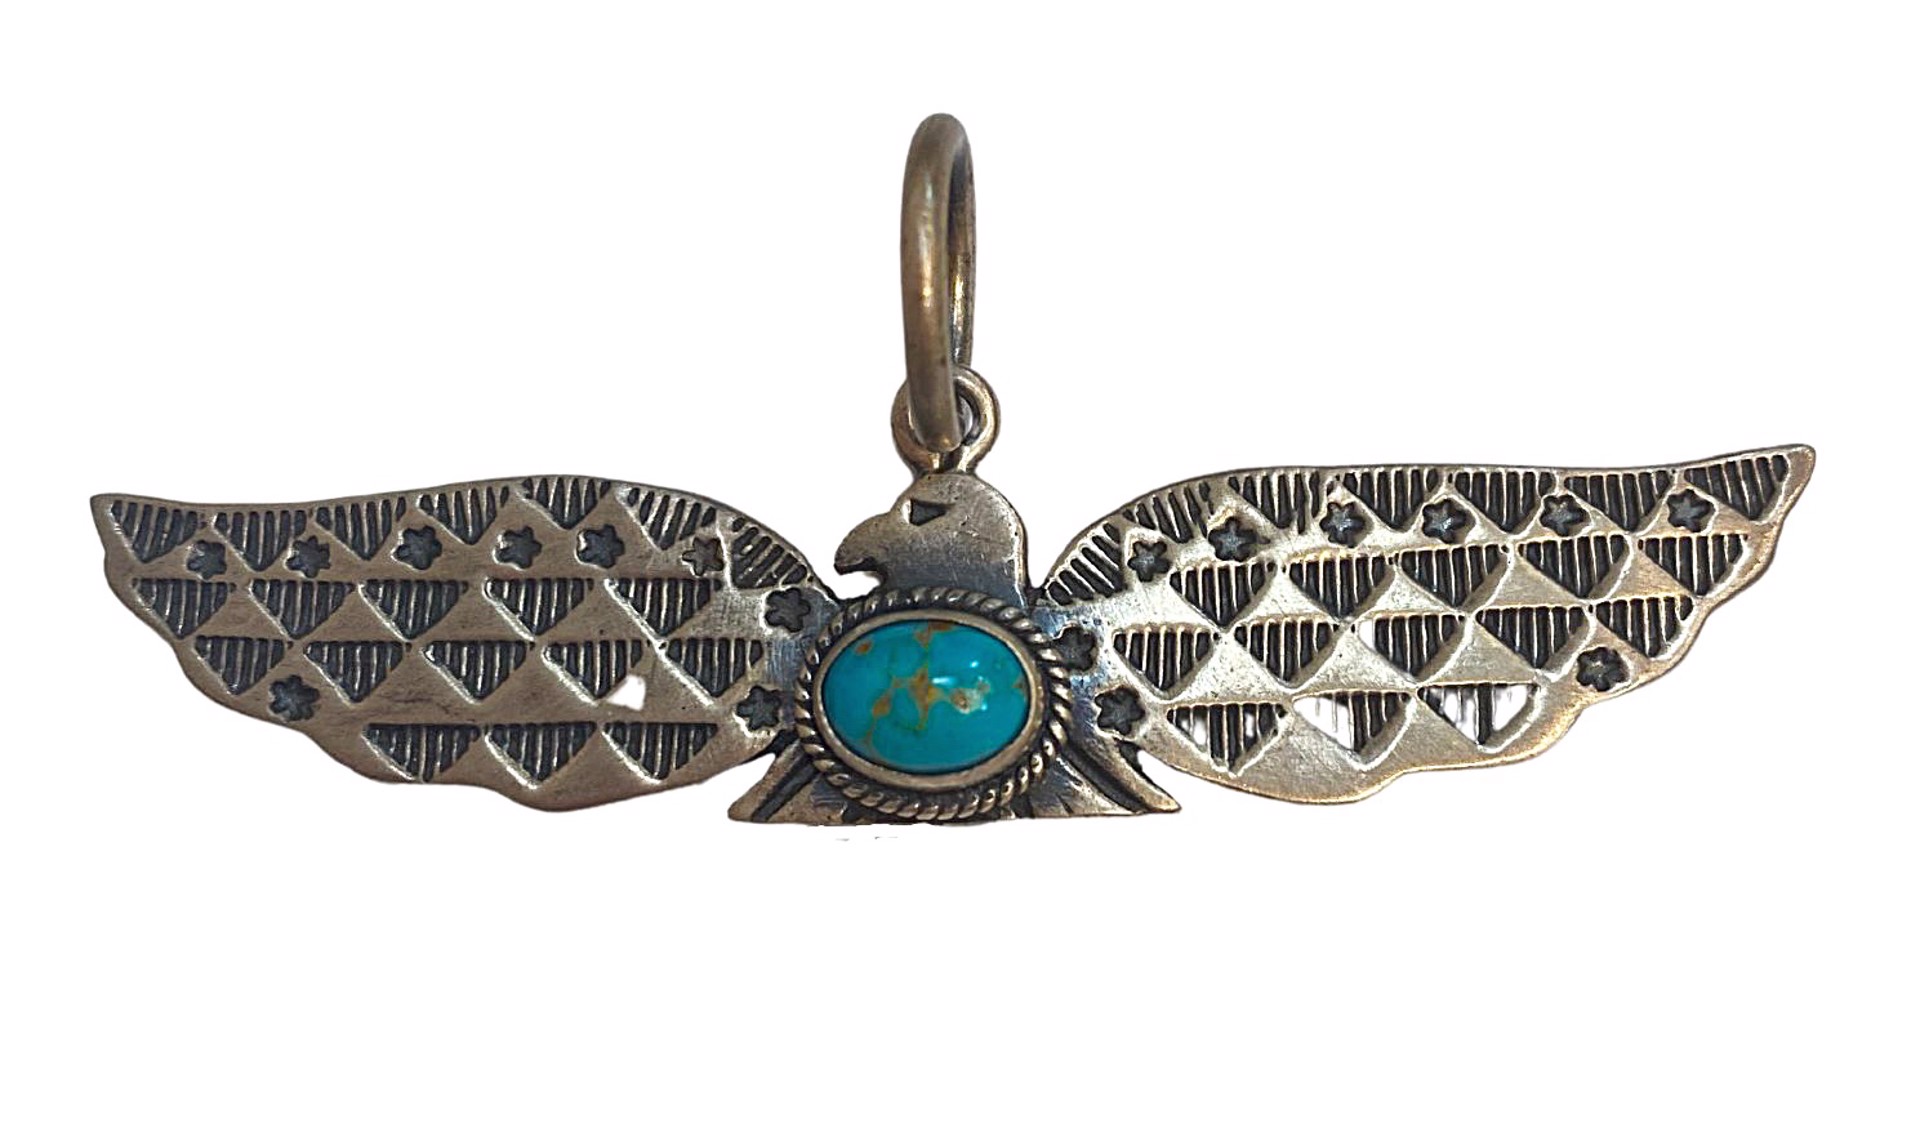 Pendant - Brushed Sterling Silver With Turquoise Eagle by Dan Dodson